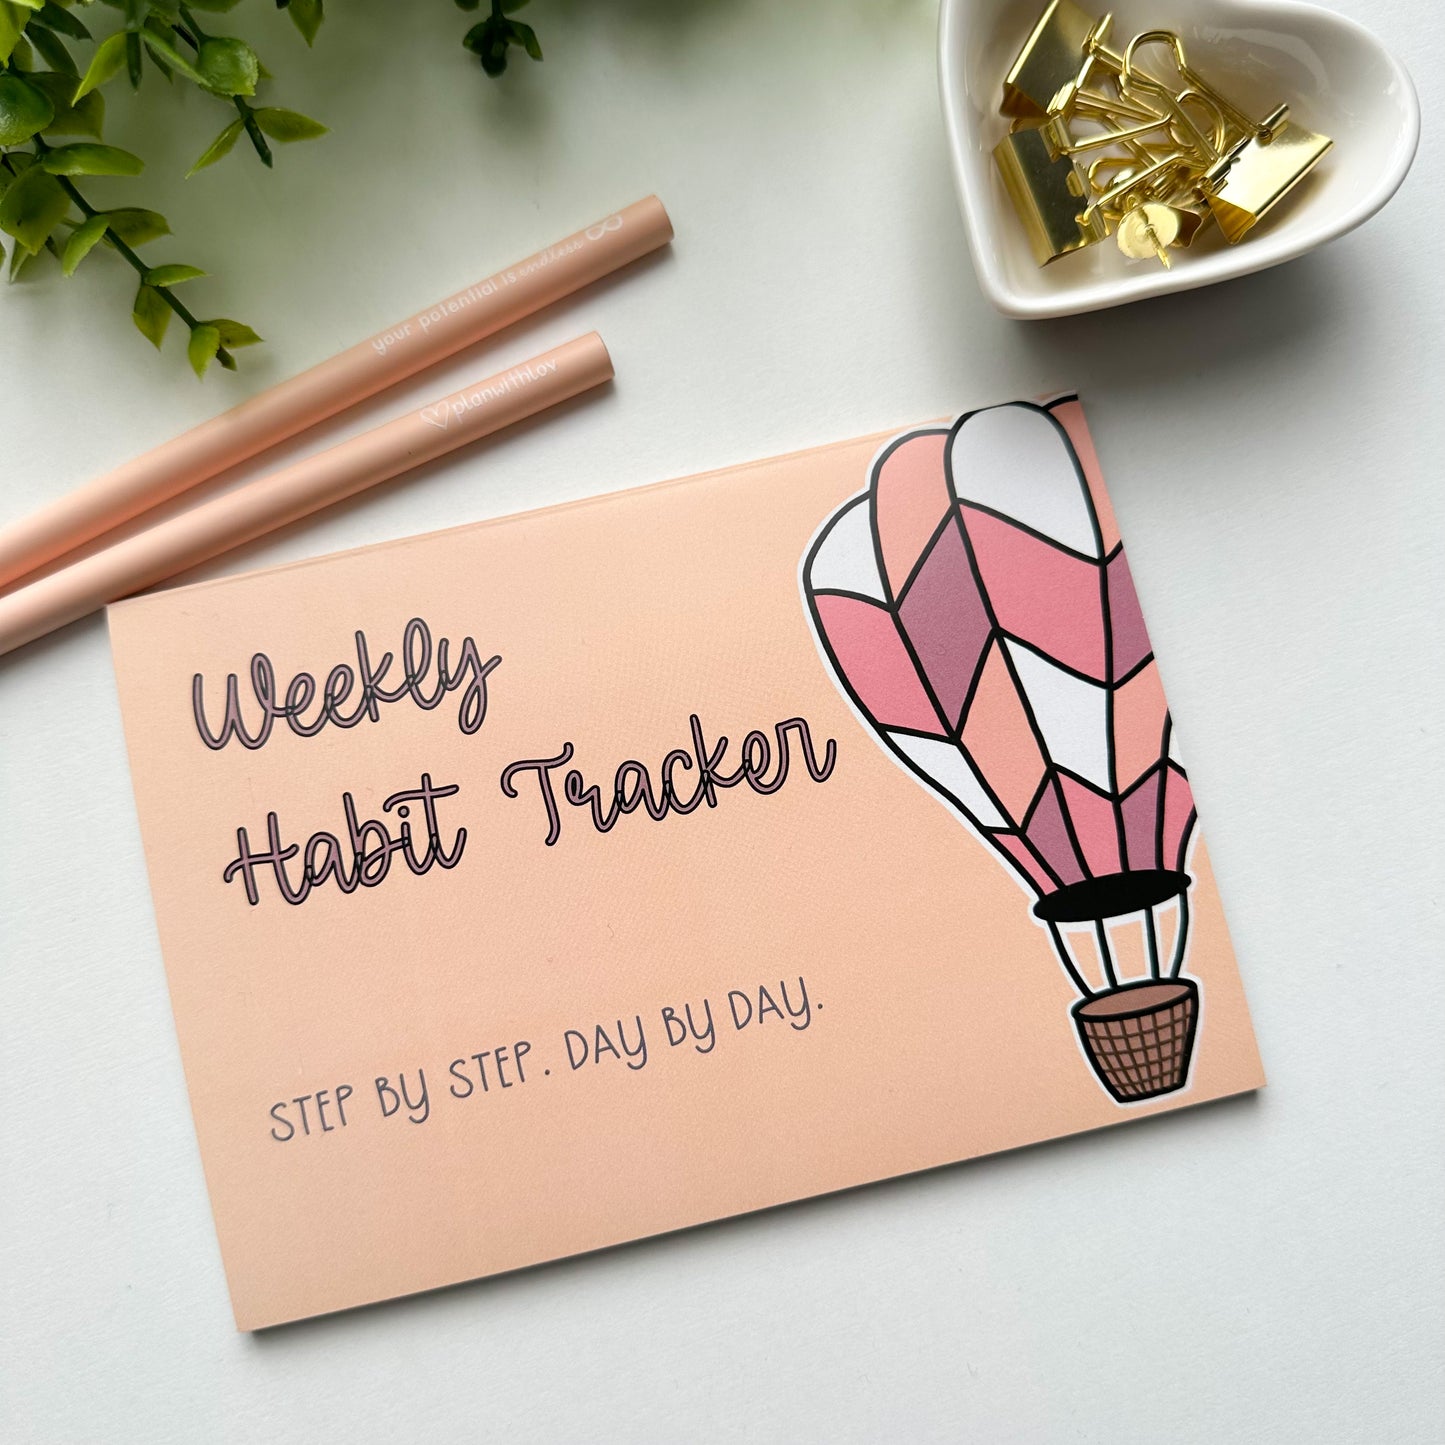 Weekly Habit Tracker | "Step by step. Day by day." | A6 horizontal